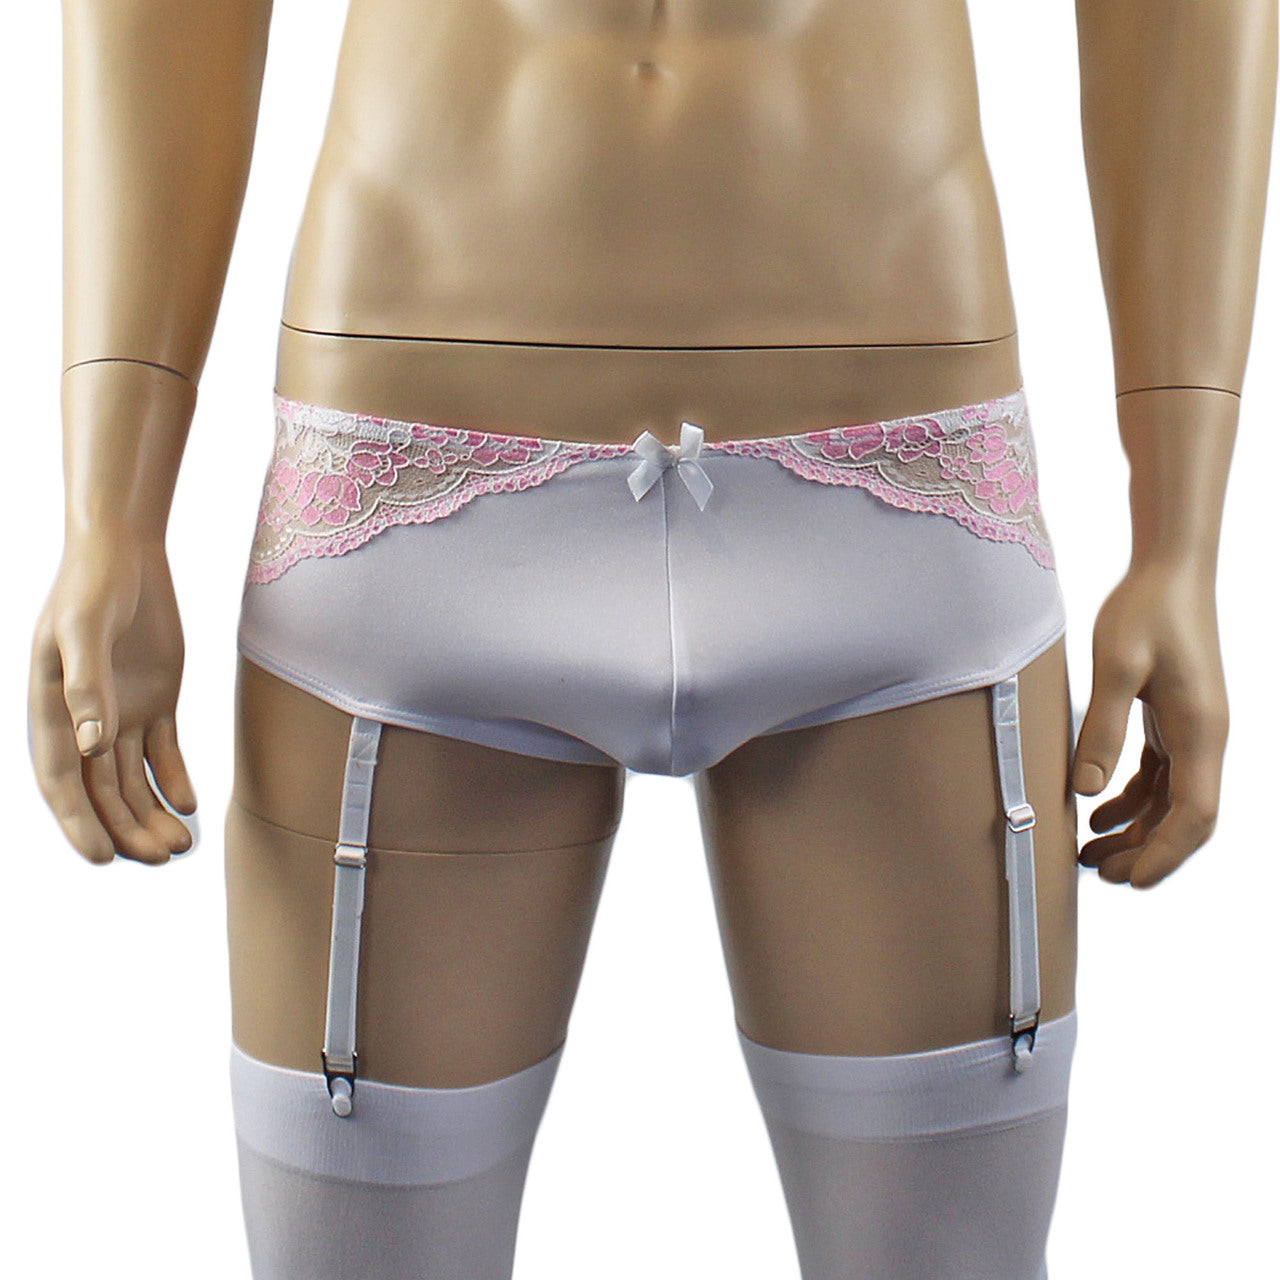 Mens Luxury Bra Top and Bikini Brief with Garters & Stockings (white plus other colours)